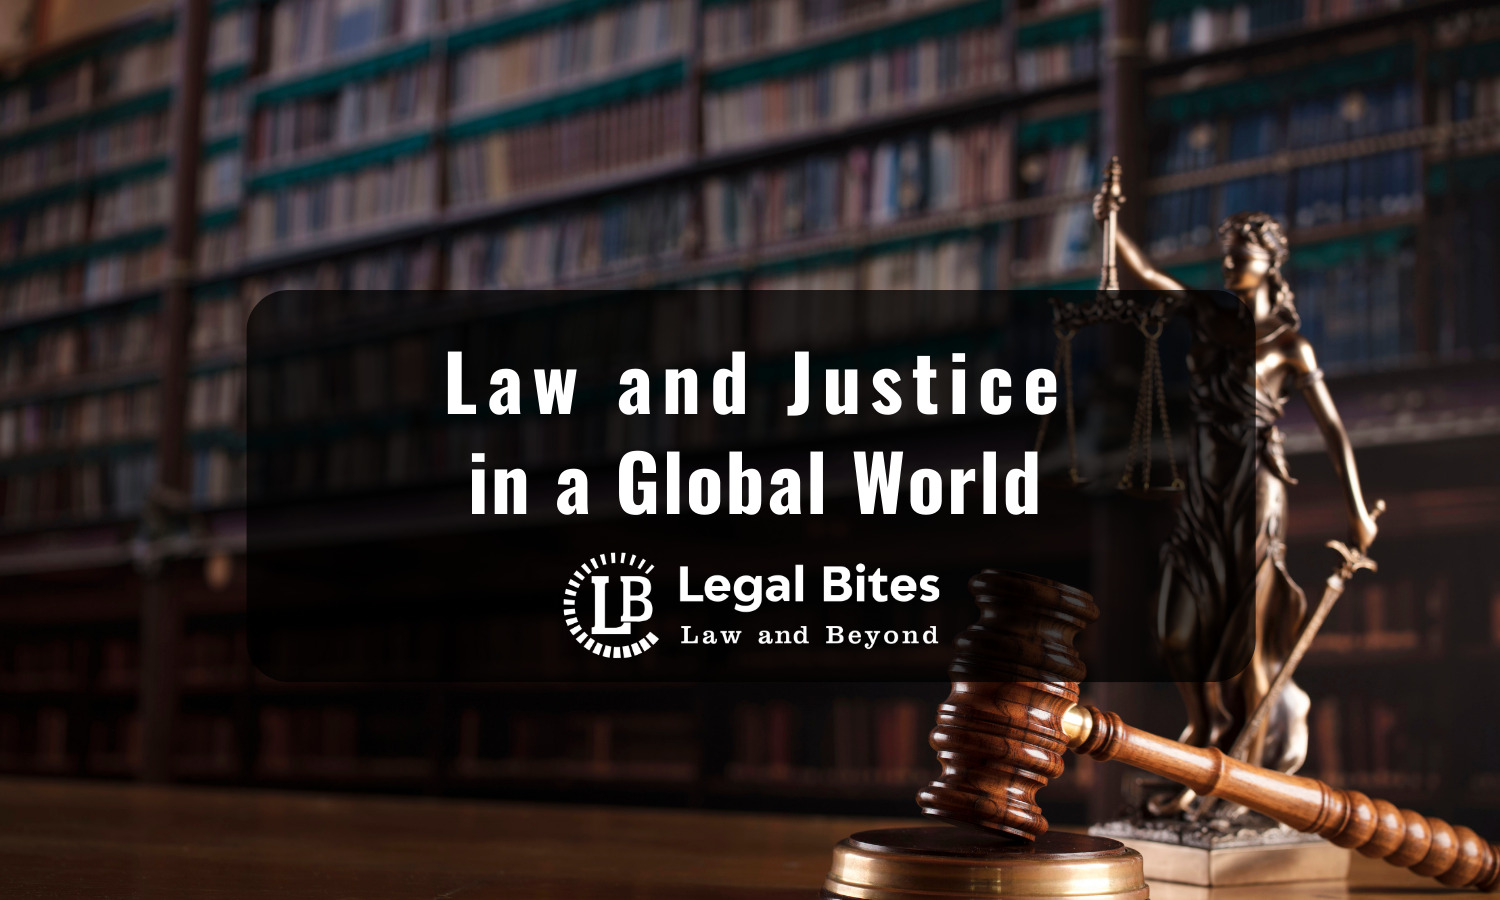 law and justice in globalizing world research paper topics